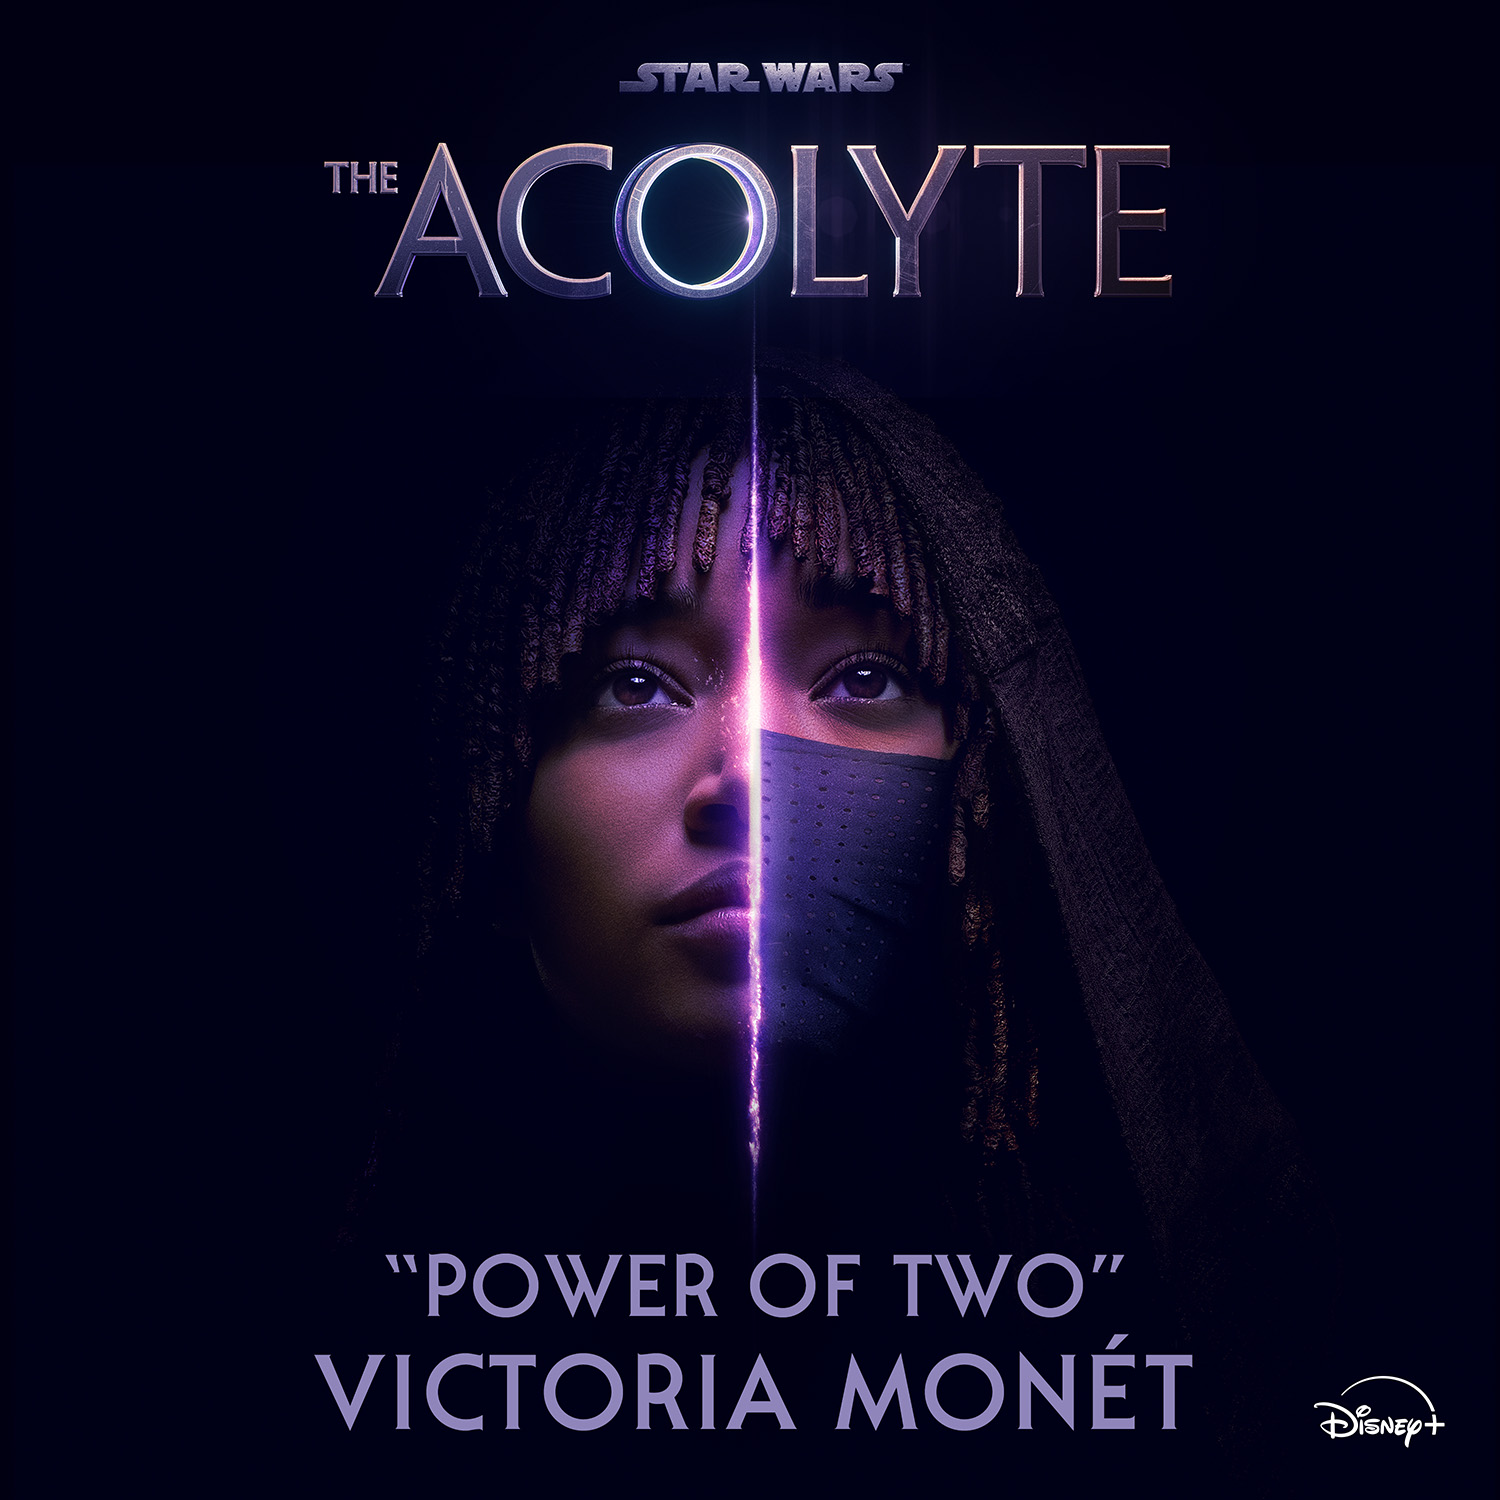 Image shows a promotional poster for the Star Wars series "The Acolyte." The poster features a close-up of a character's face, split down the middle by a glowing, purple light, symbolizing the "Power of Two." The character wears a dark hood and a mask. The title "The Acolyte" is at the top, with "Power of Two" by Victoria Monét displayed at the bottom, along with the Disney+ logo.